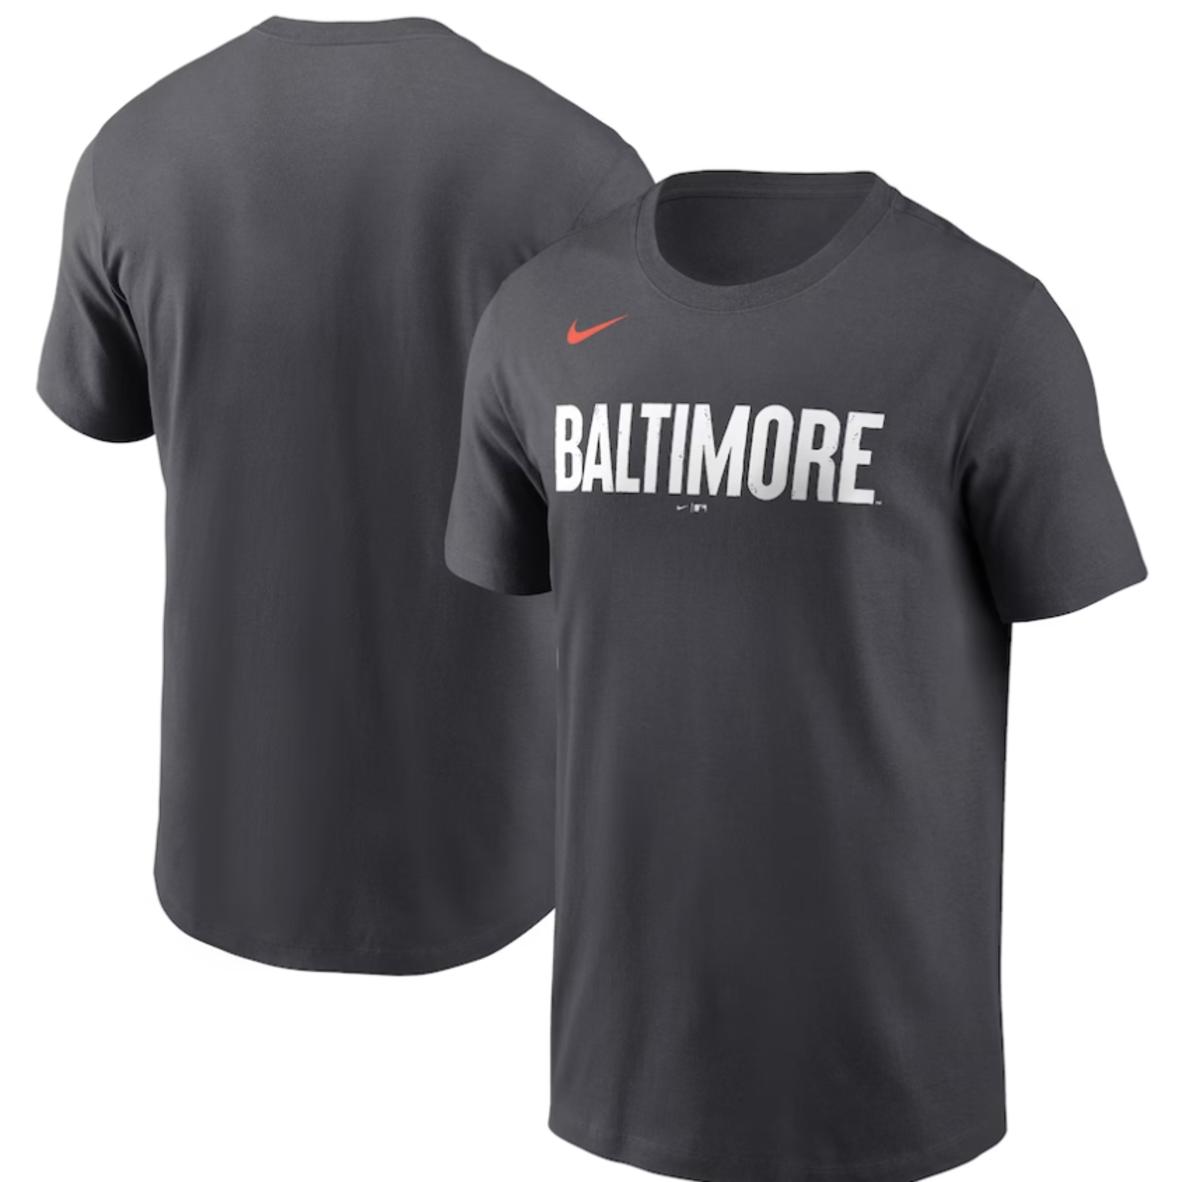 White Rose Baseball on X: Possible development for Orioles city connect  jerseys, orioles are selling merch with the same colors as the leaked city  connect socks #orioles #CityConnect  / X